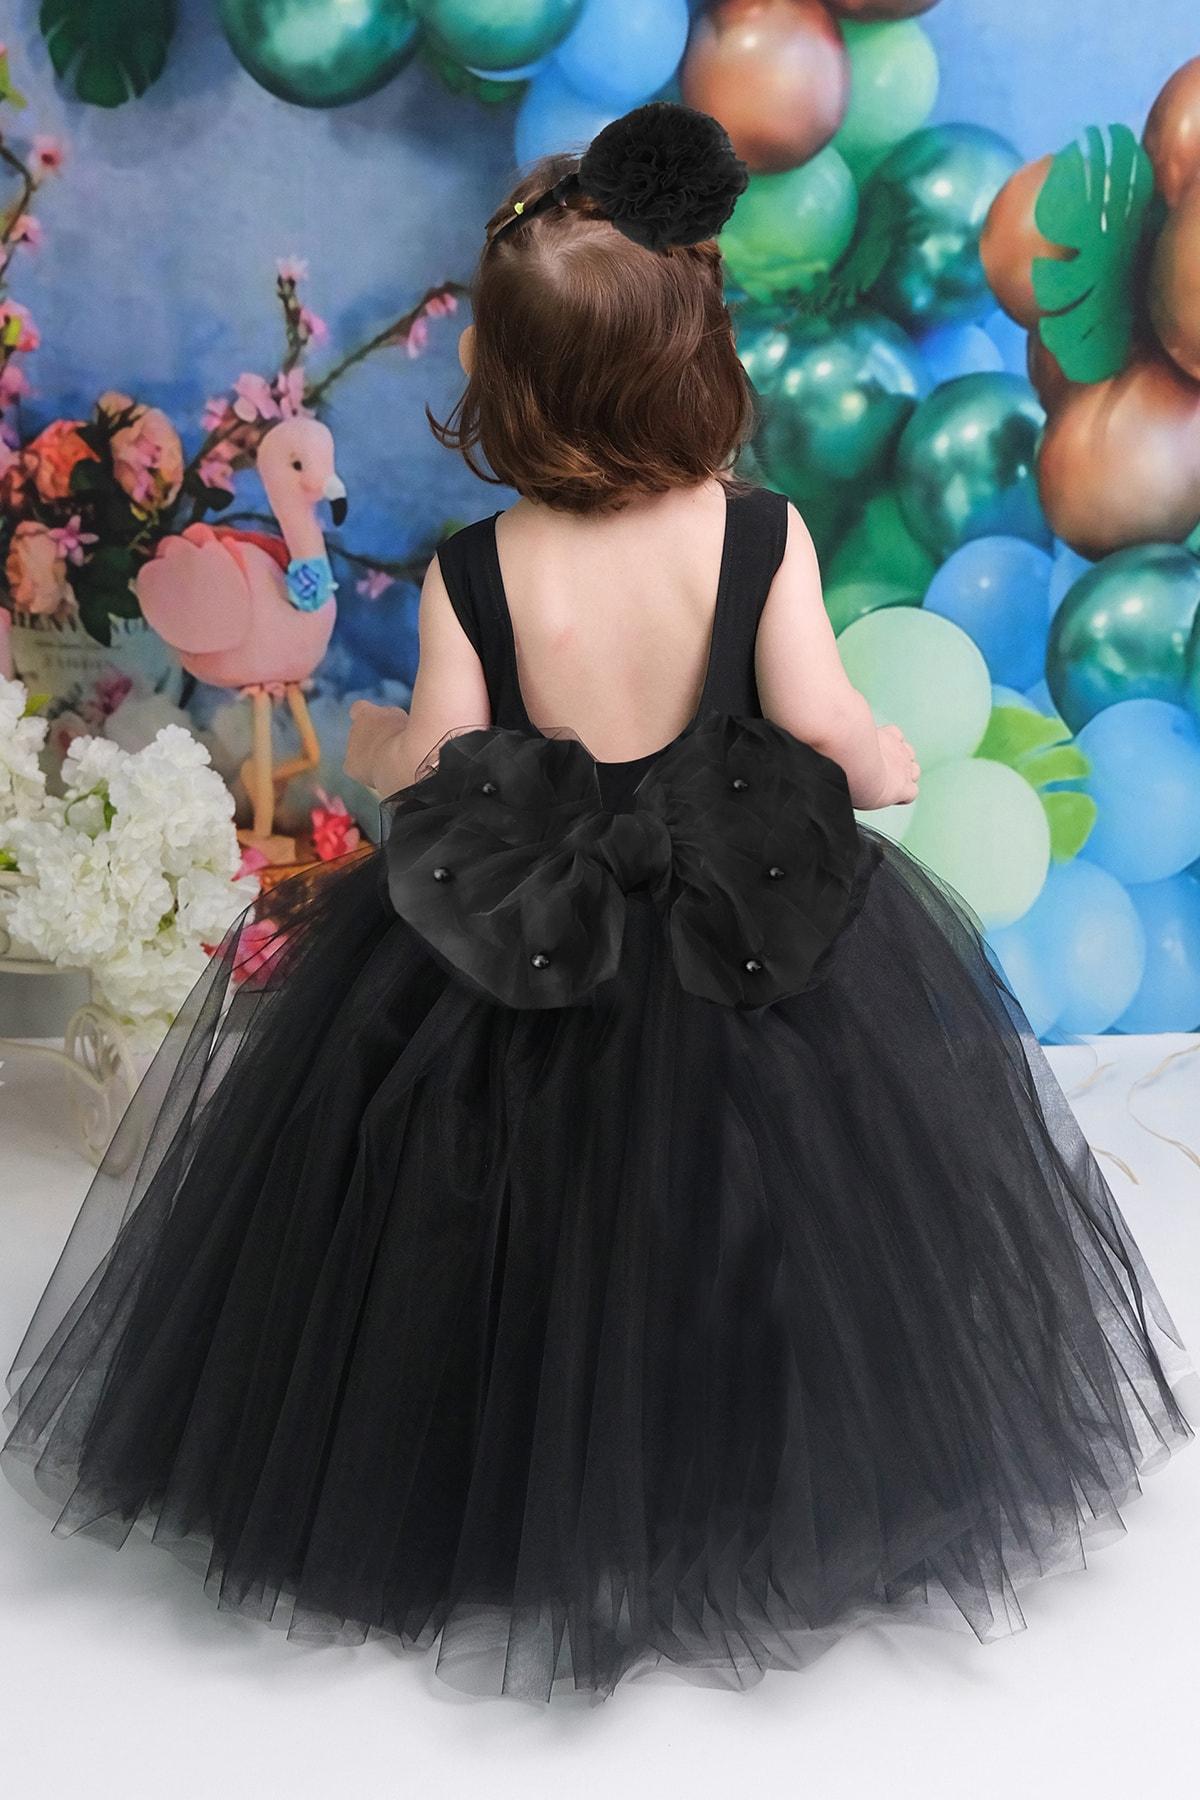 Frm Girl Kids Baby Toddler Dress for Christmas Birthday Newborn Party Princess Dress Children's Clothing